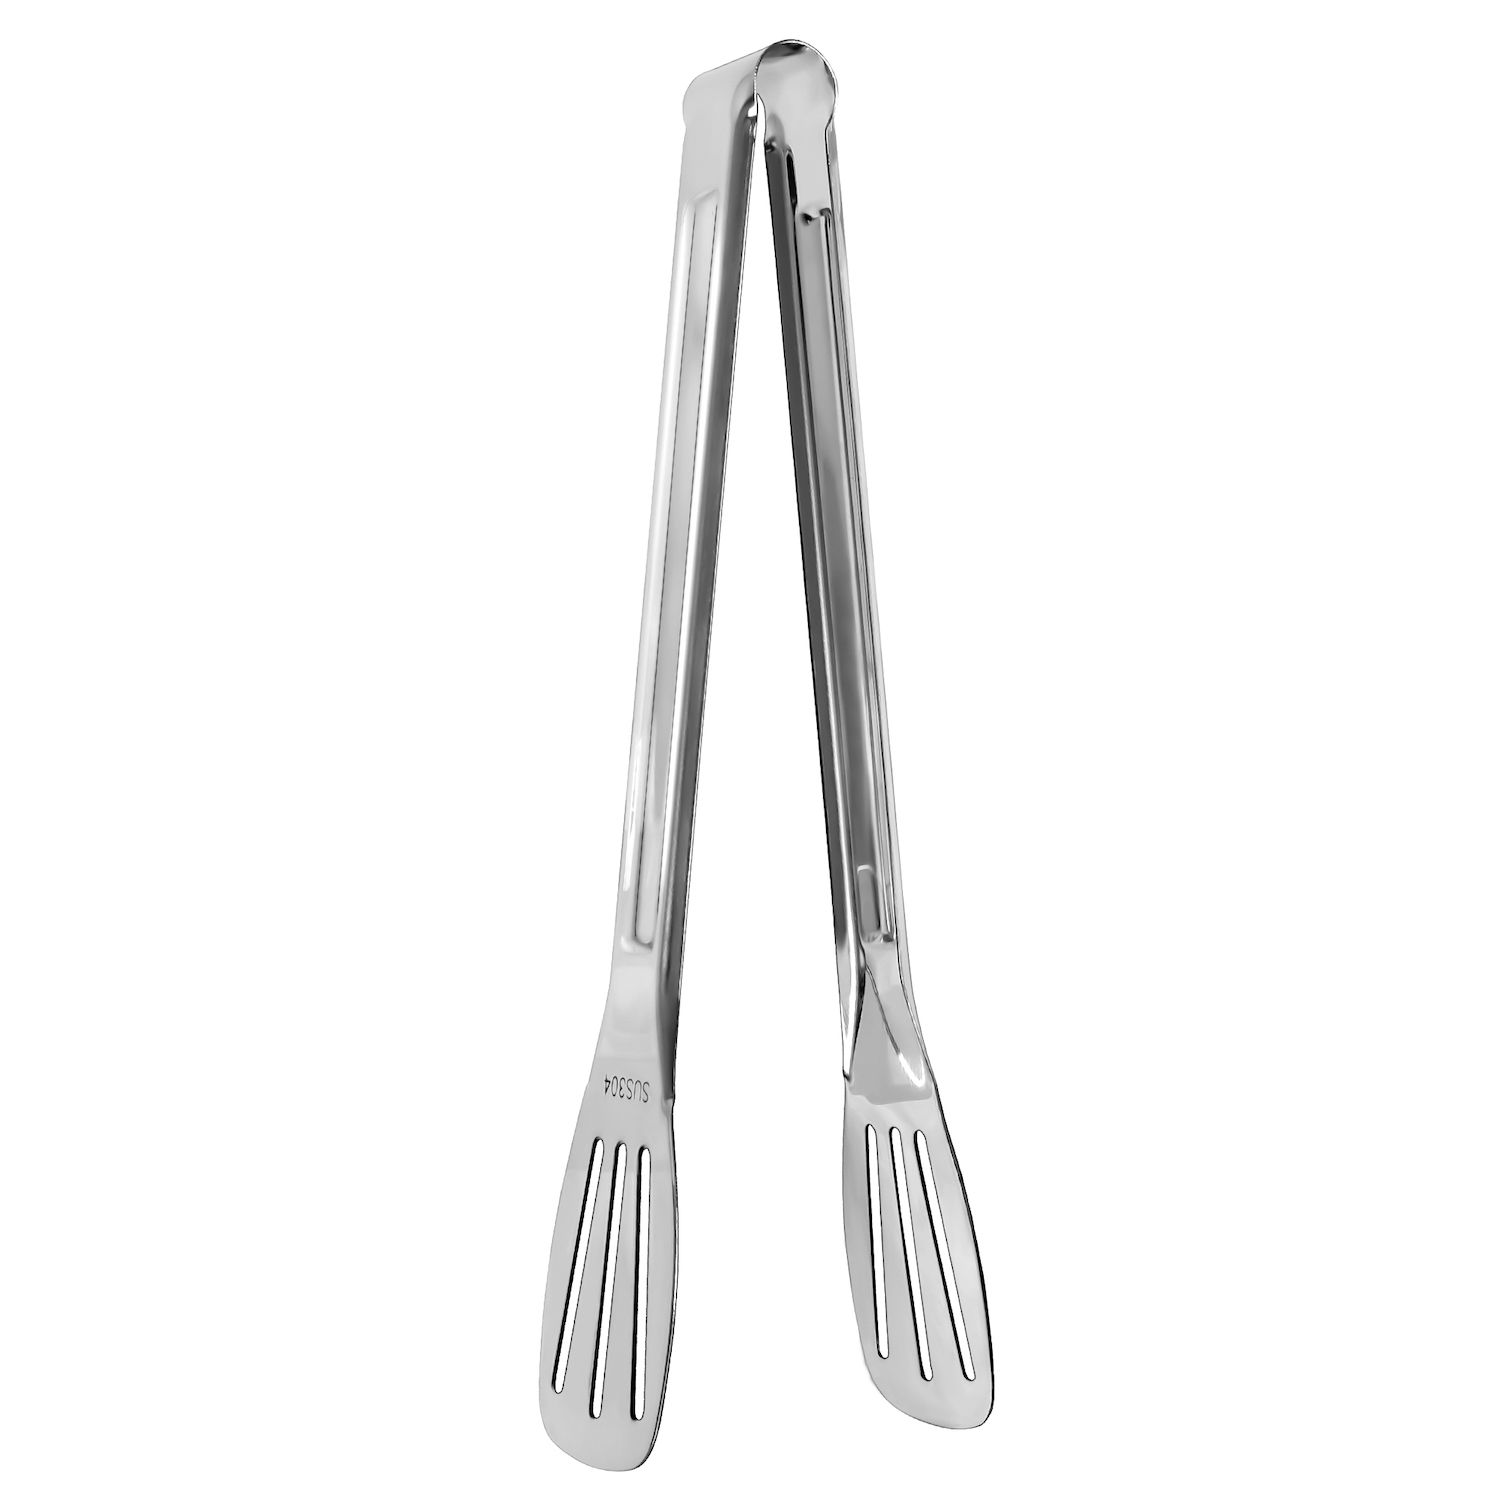 Zulay Kitchen - Premium Set of Stainless Steel Tongs for Cooking, Grilling and Barbecue